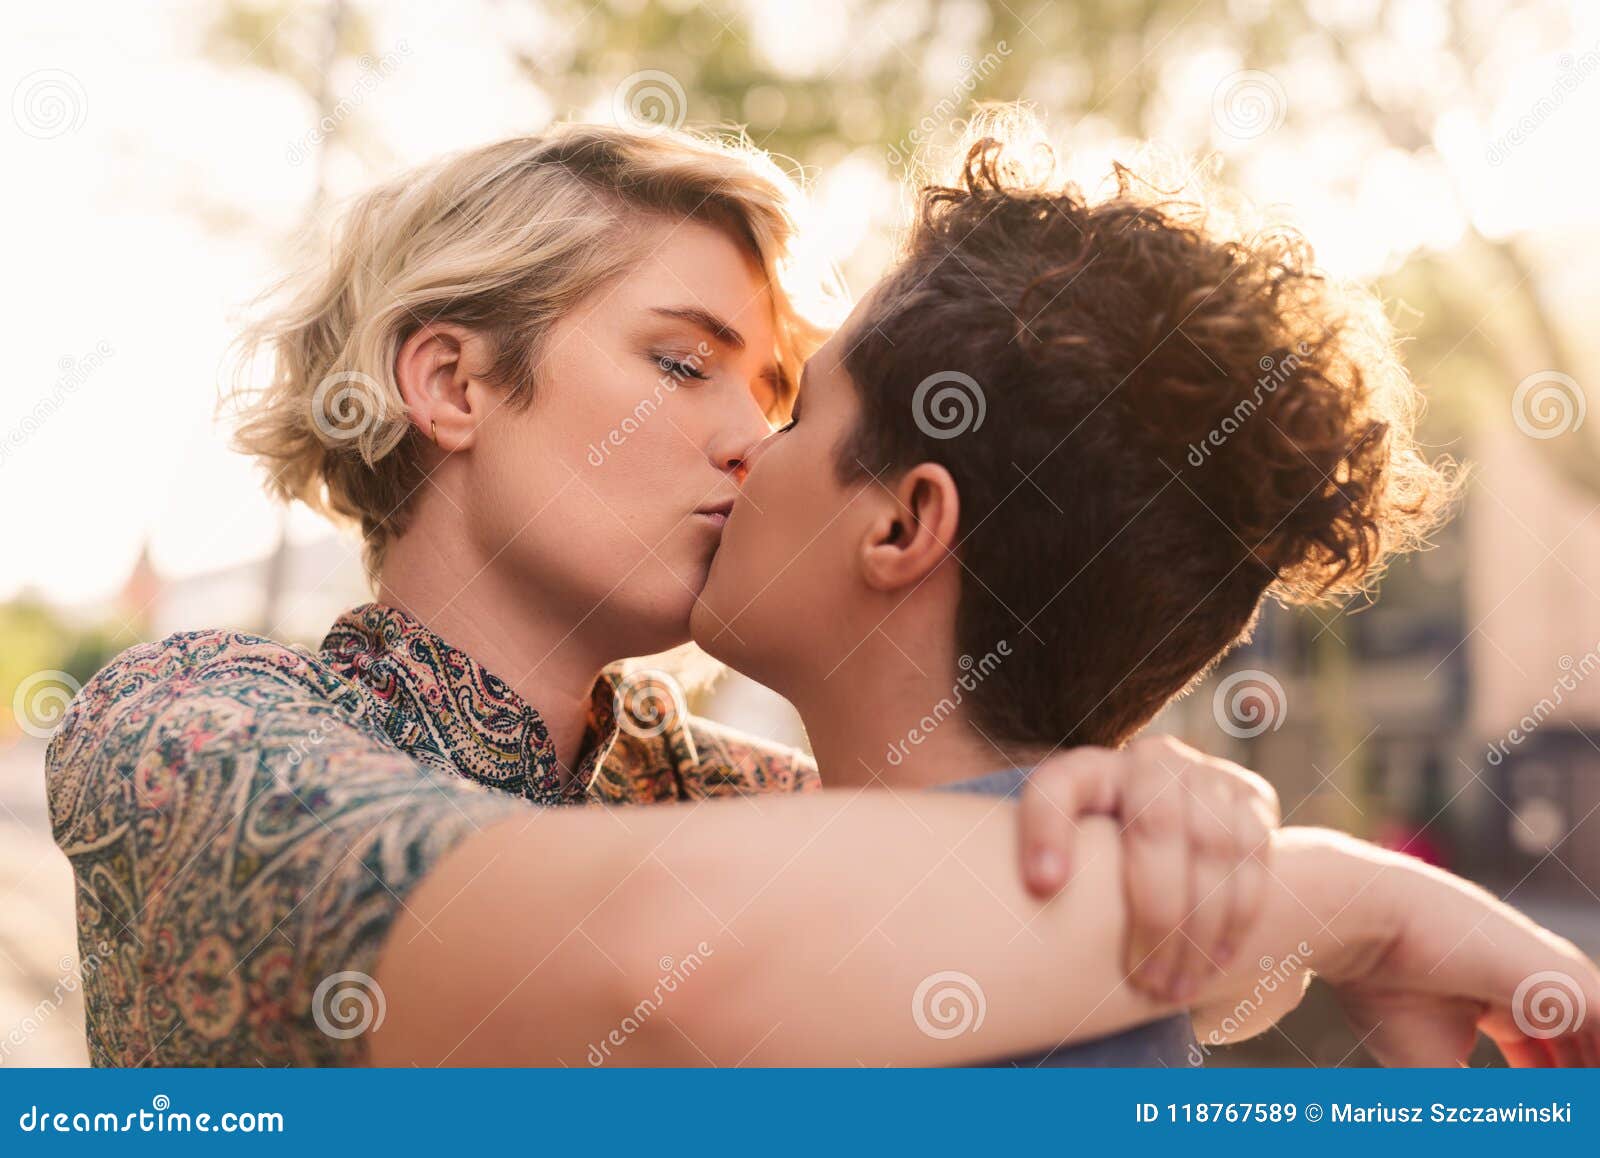 Affectionate Young Lesbian Couple Sharing a Kiss in the City Stock Image pic